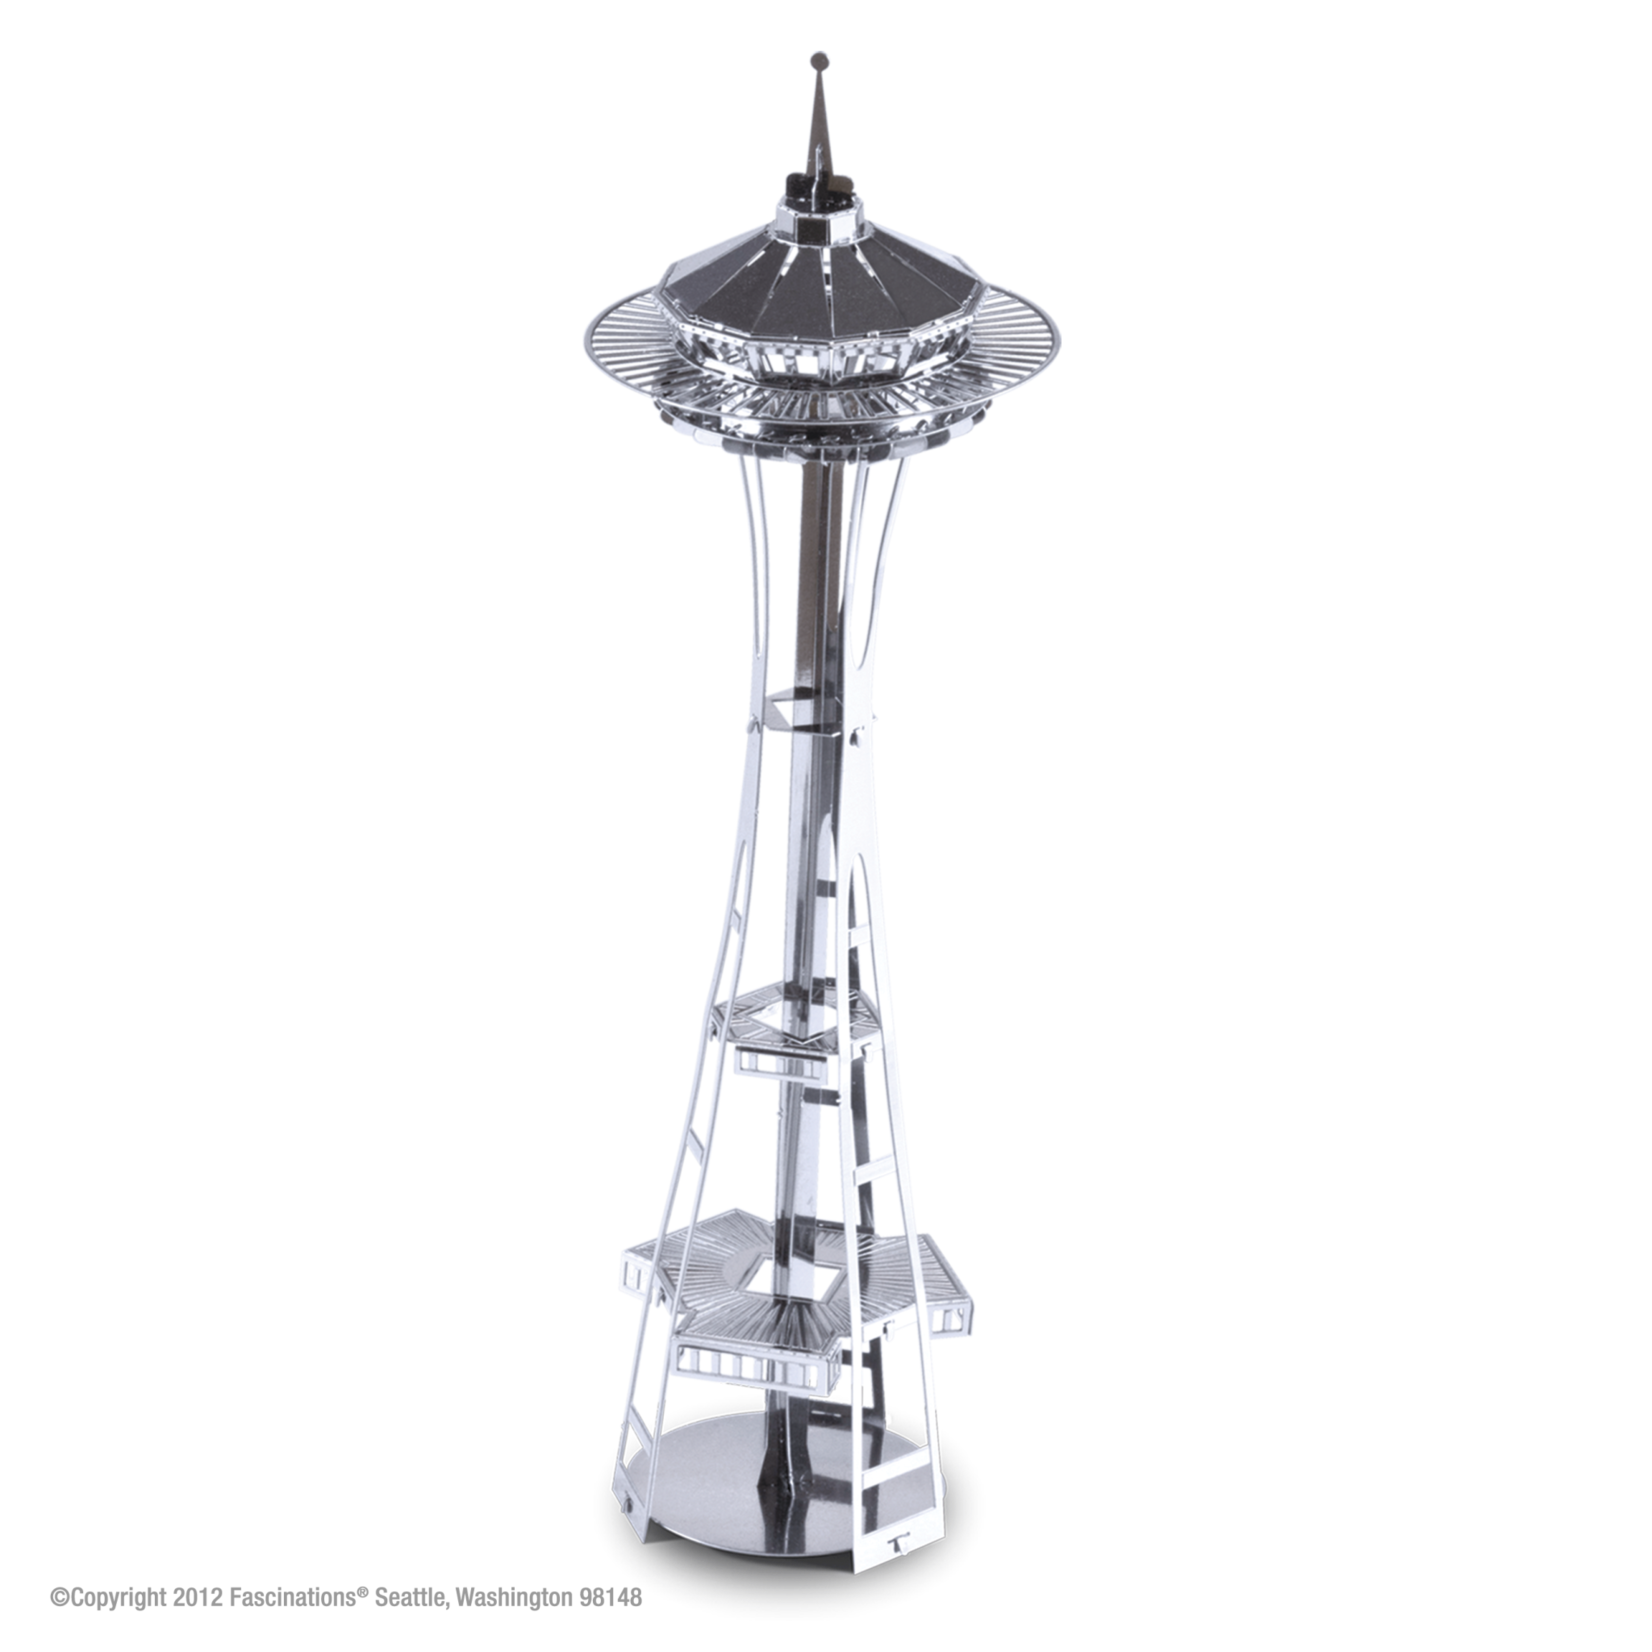 Fascinations Space Needle